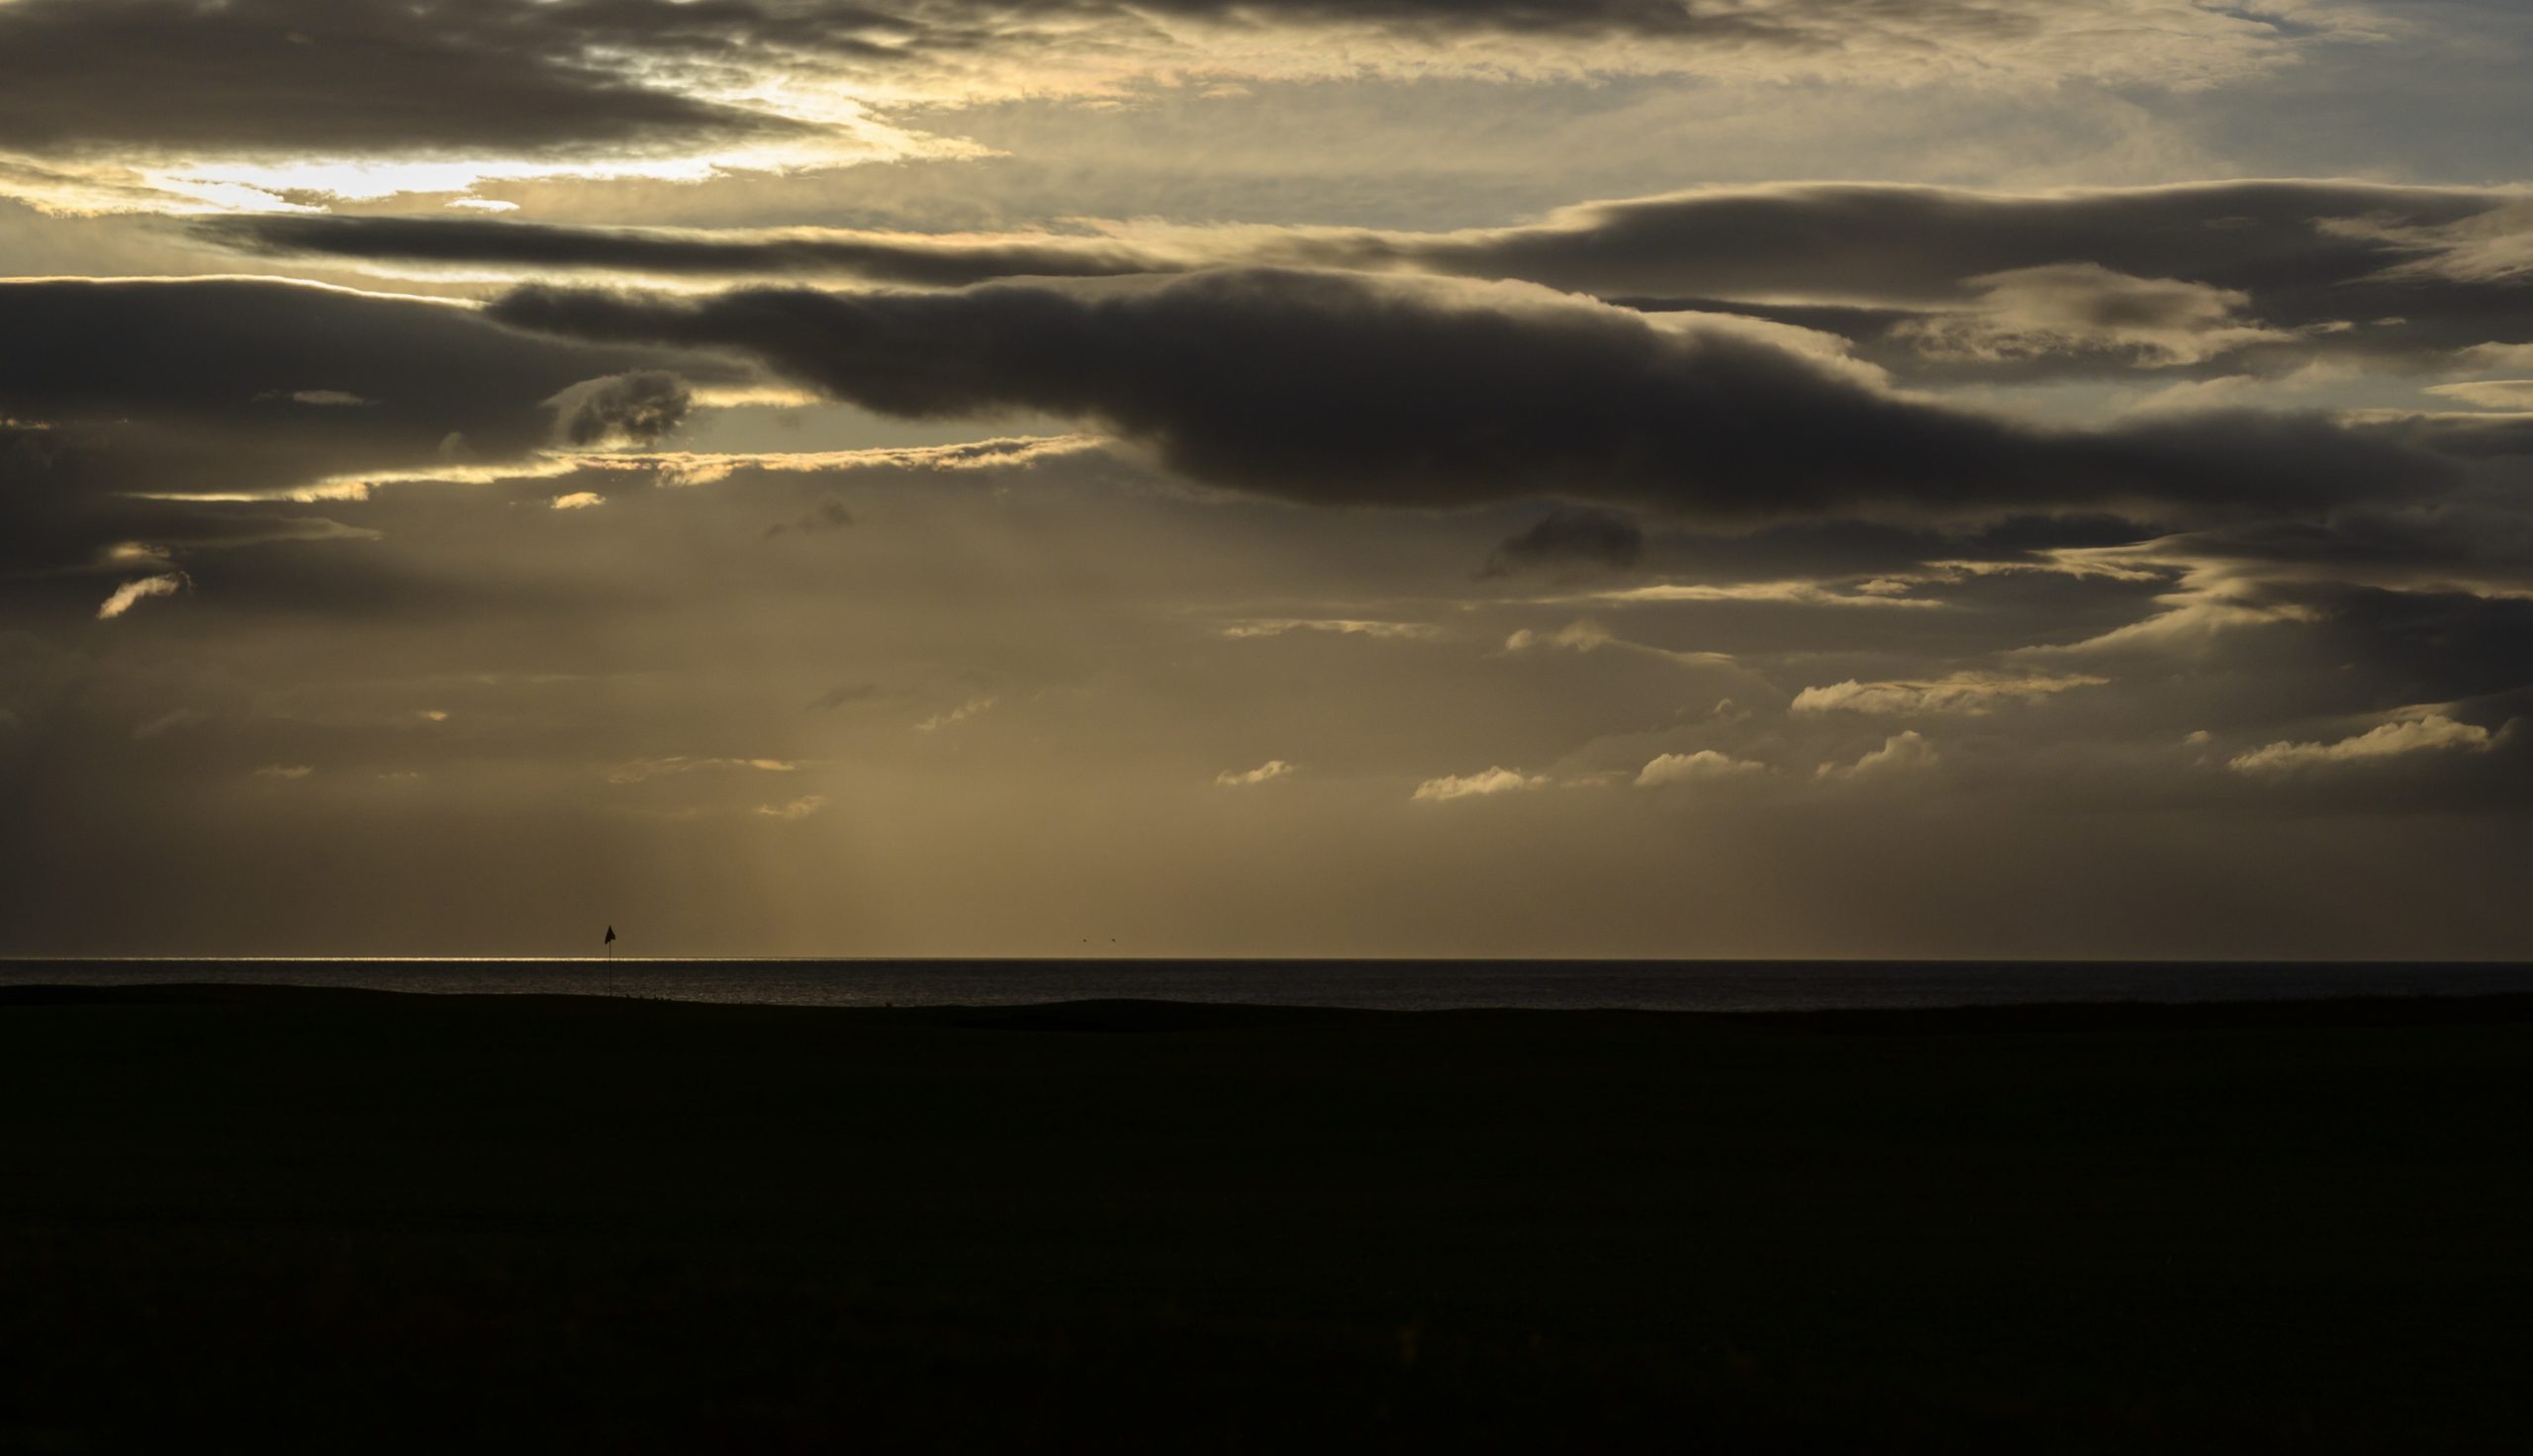 The duo will tee off at sunrise at Royal Dornoch